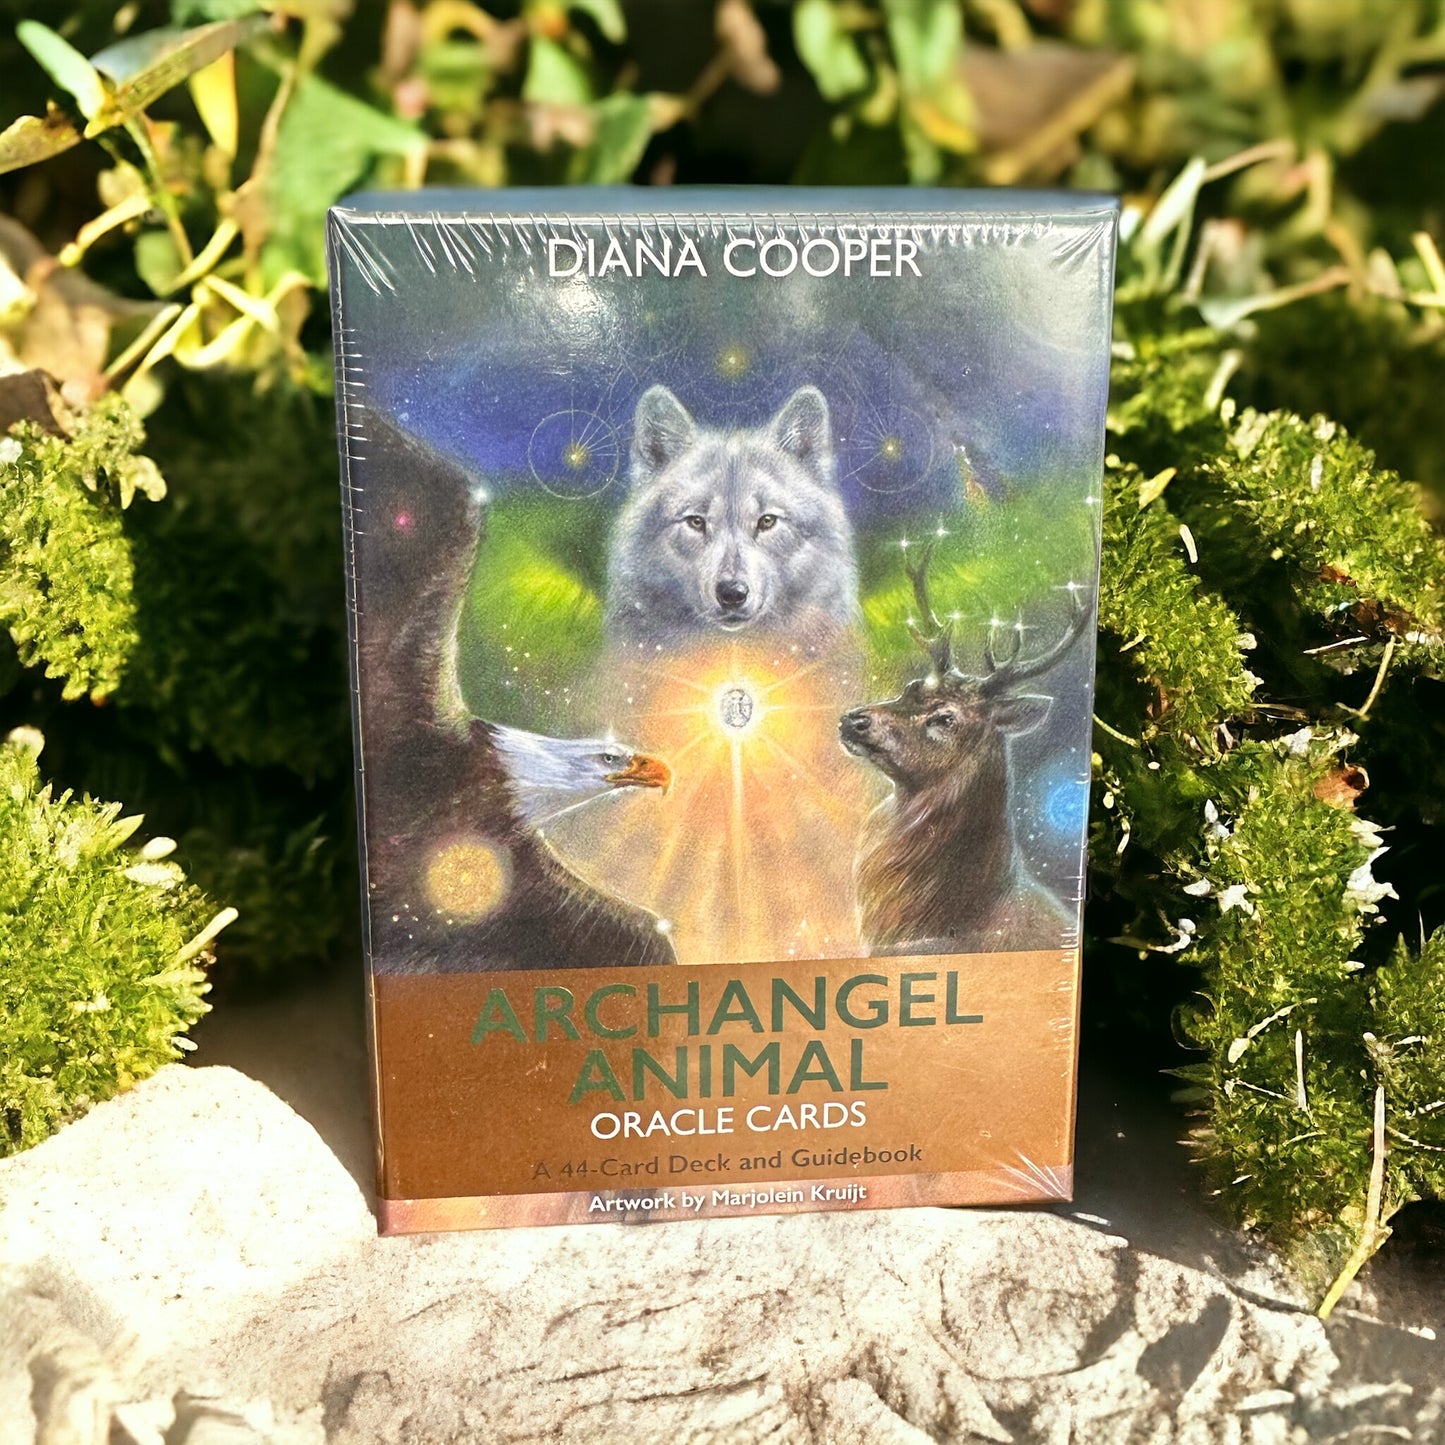 Archangel Animal Orcale Cards